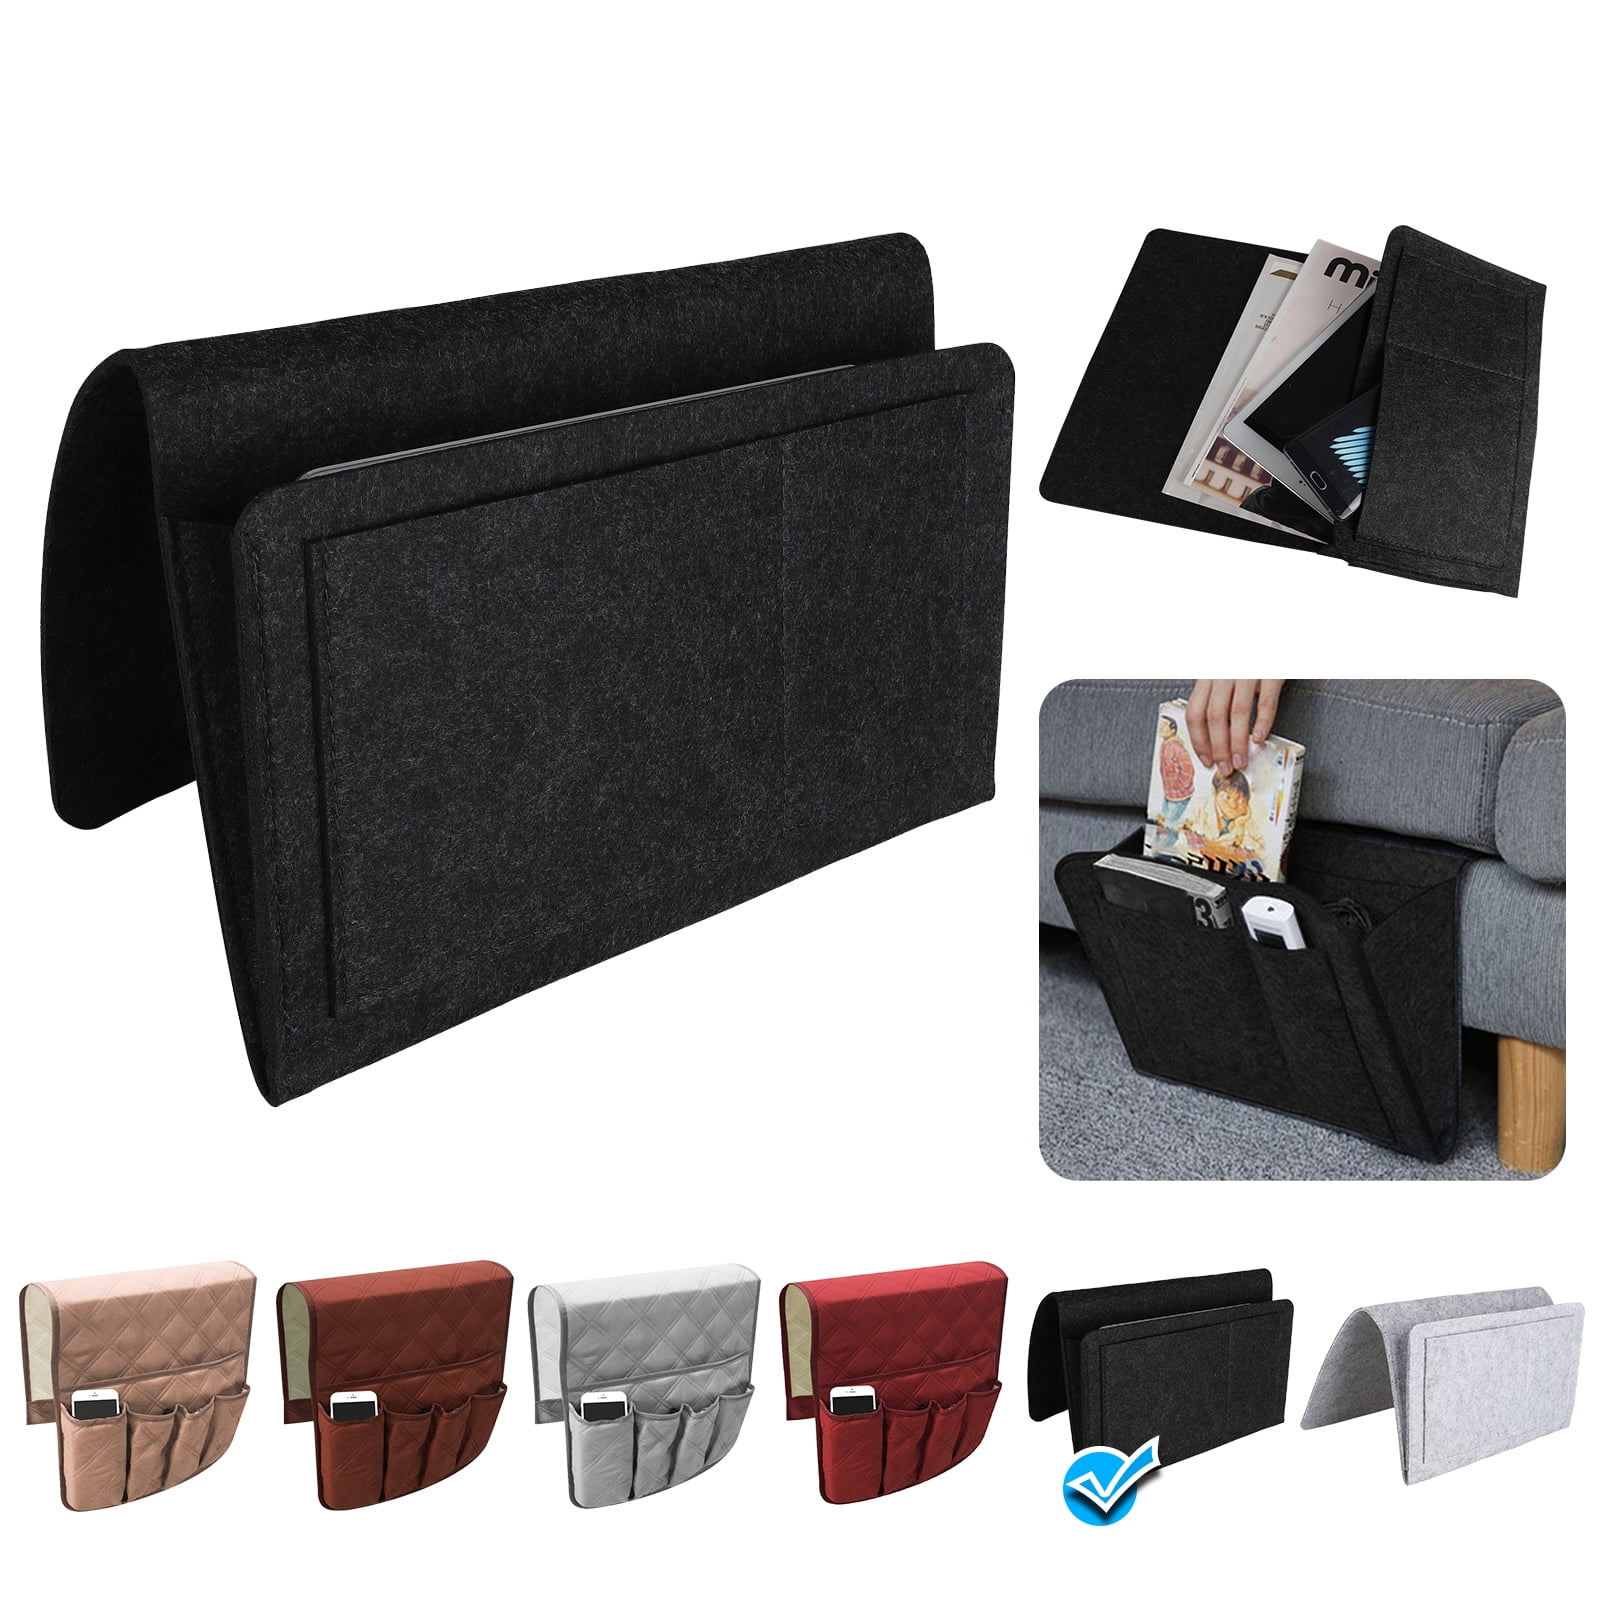 Waterproof Sofa Couch Chair Armrest Durable Soft Caddy Organizer Holder for Phone Magazines Book TV Remote 